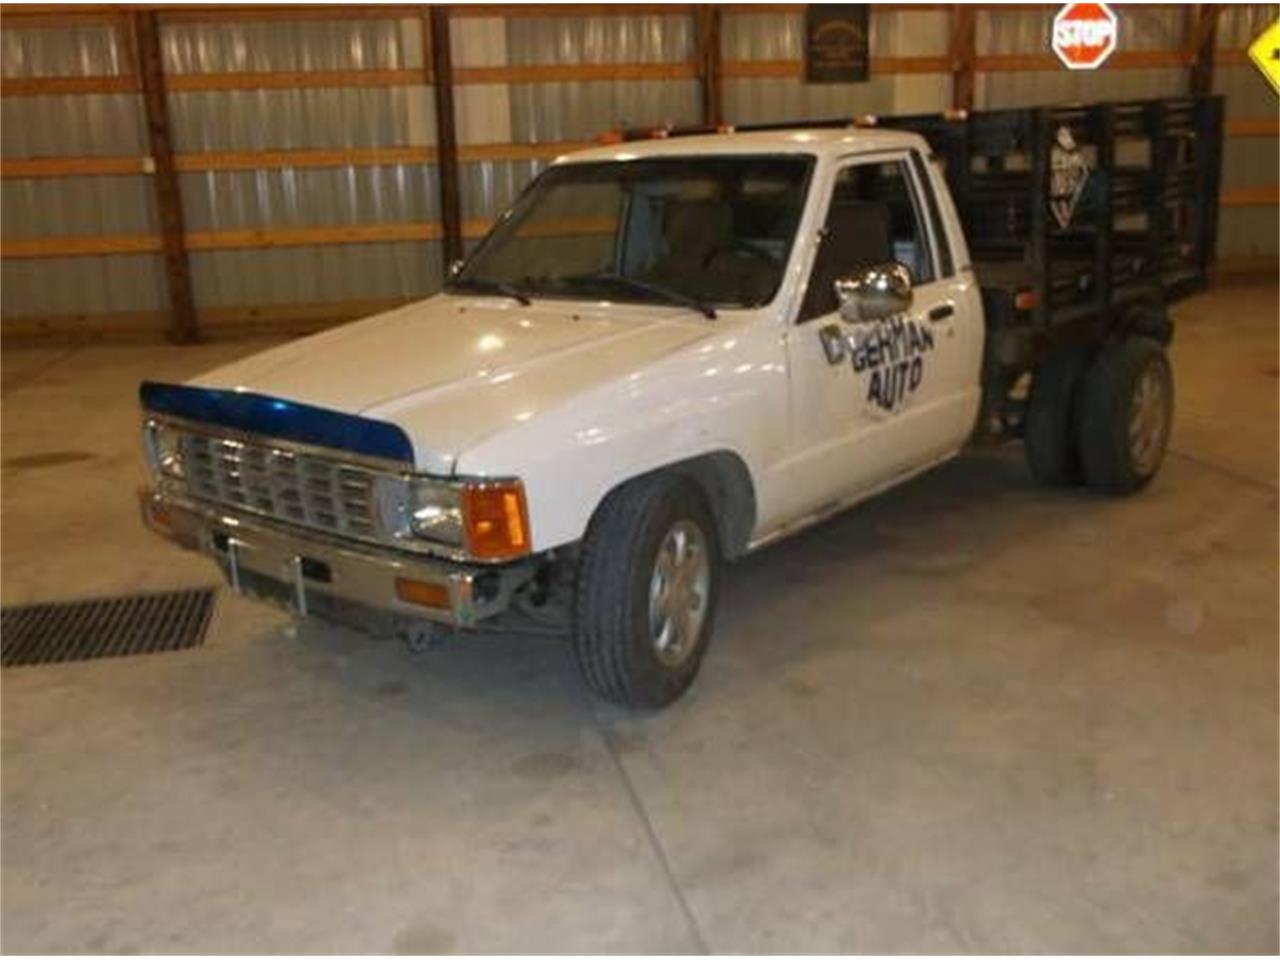 For Sale: 1984 Toyota Pickup in Cadillac, Michigan for sale in Cadillac, MI